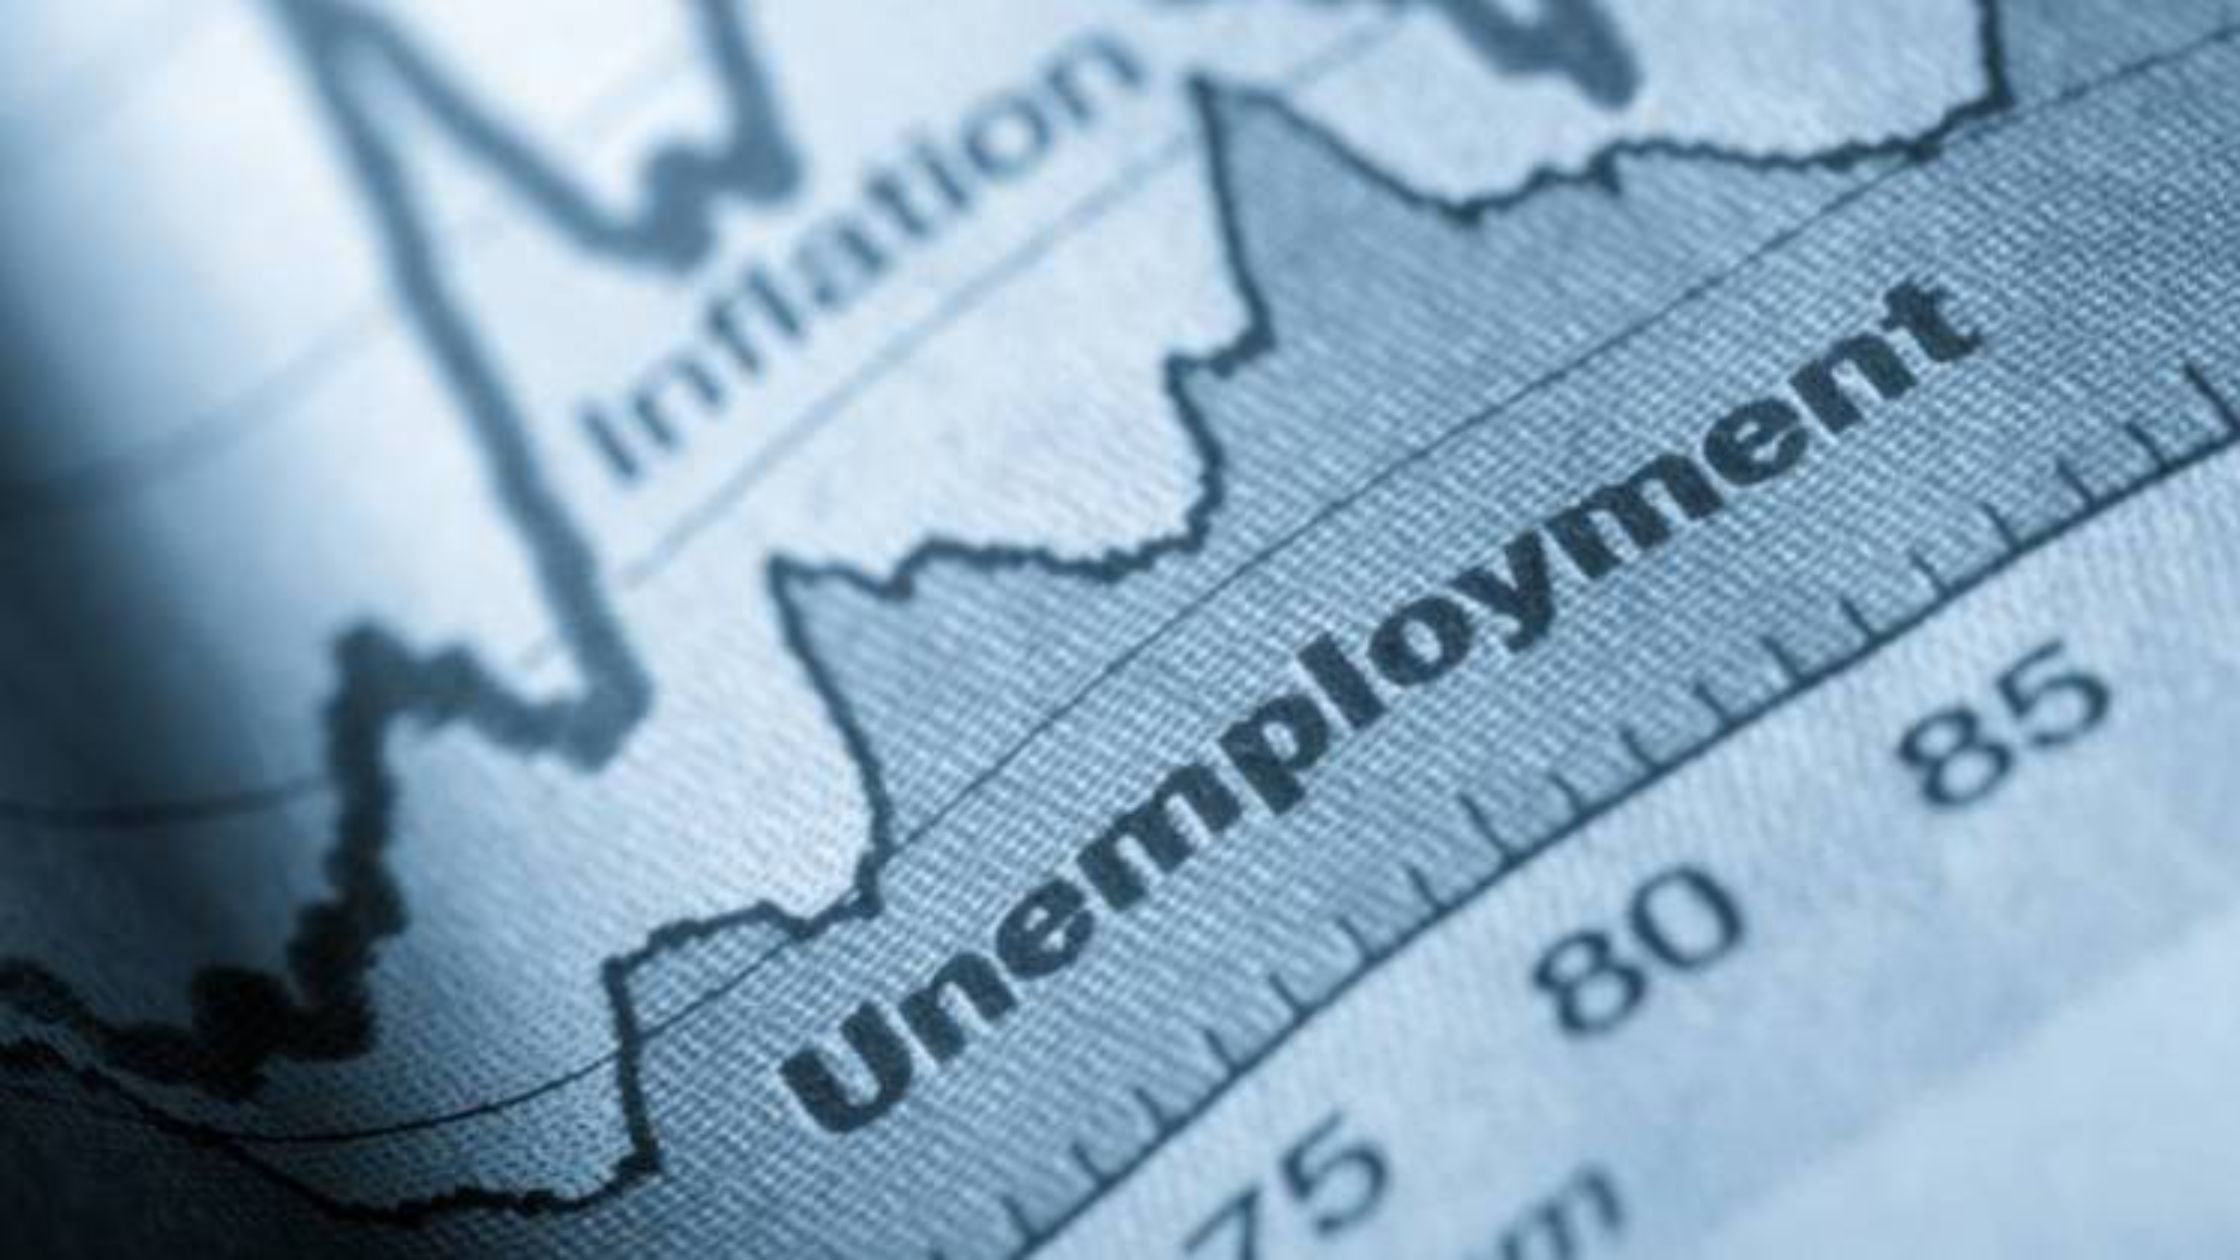 Bihar in sixth place in terms of unemployment this time